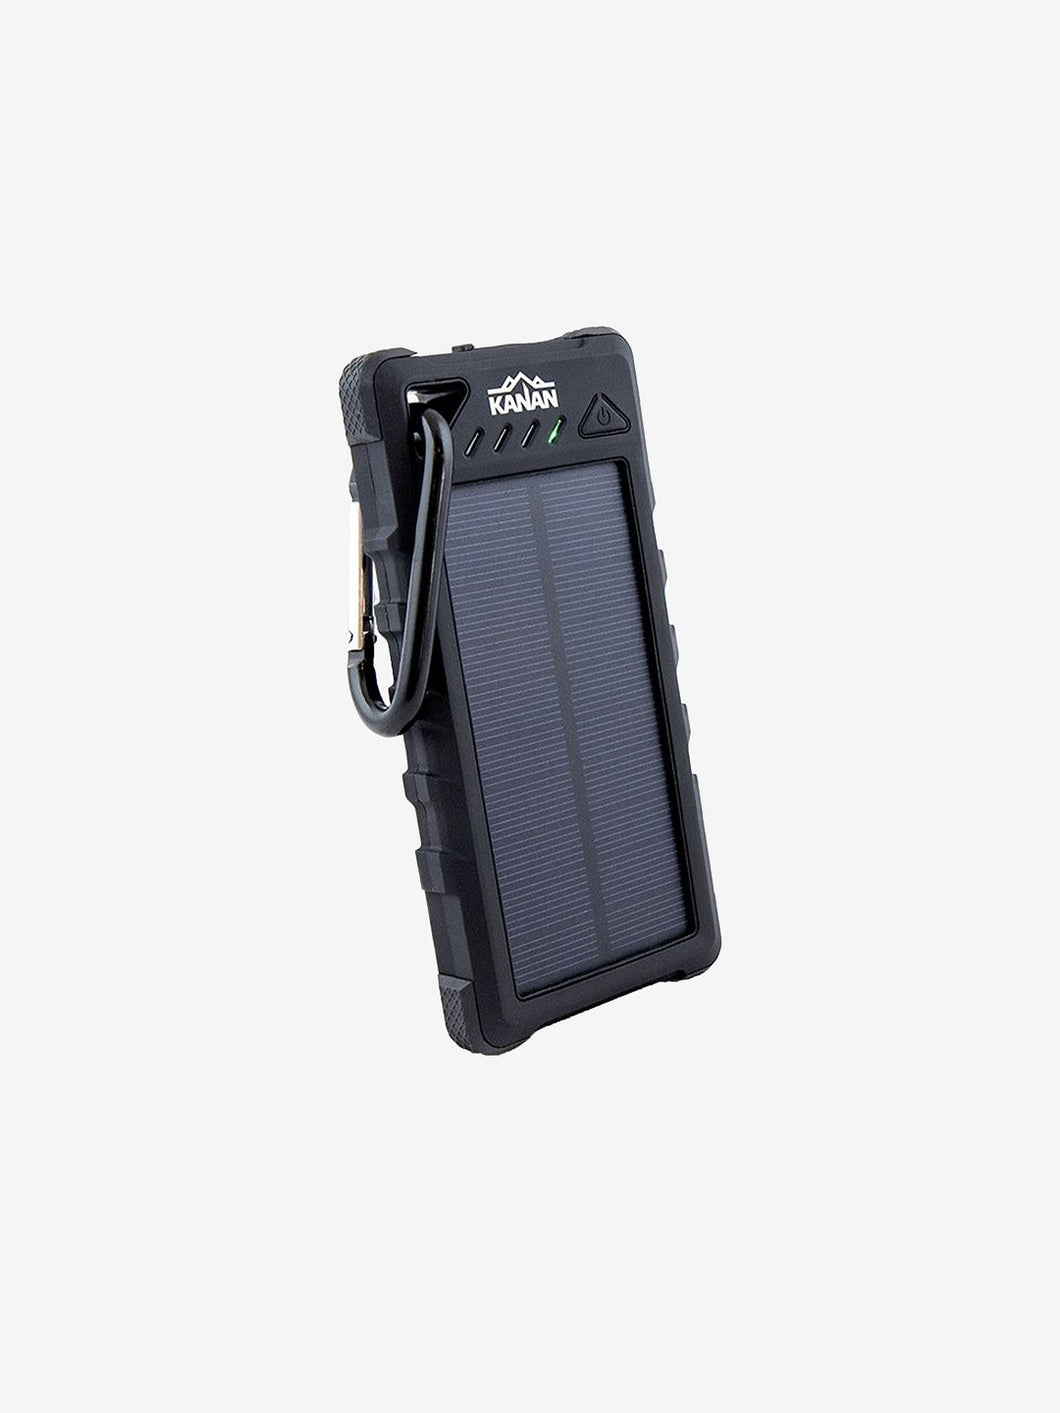 Pictured is a portable, Black solar powered power bank with its own medium-sized, black carabiner. The top end has a charging status shown by 4 LED lights and written above them is the logo for Kanan Outdoors written in white as KANAN and a stylized mountain. This is the Weatherproof Solar Power Bank and Flashlight with its own solar panel. Perfect while on your overland roof top tent camping for any recharging and flashlight needs! Available for sale by SMRT Tent in Edmonton, Canada.